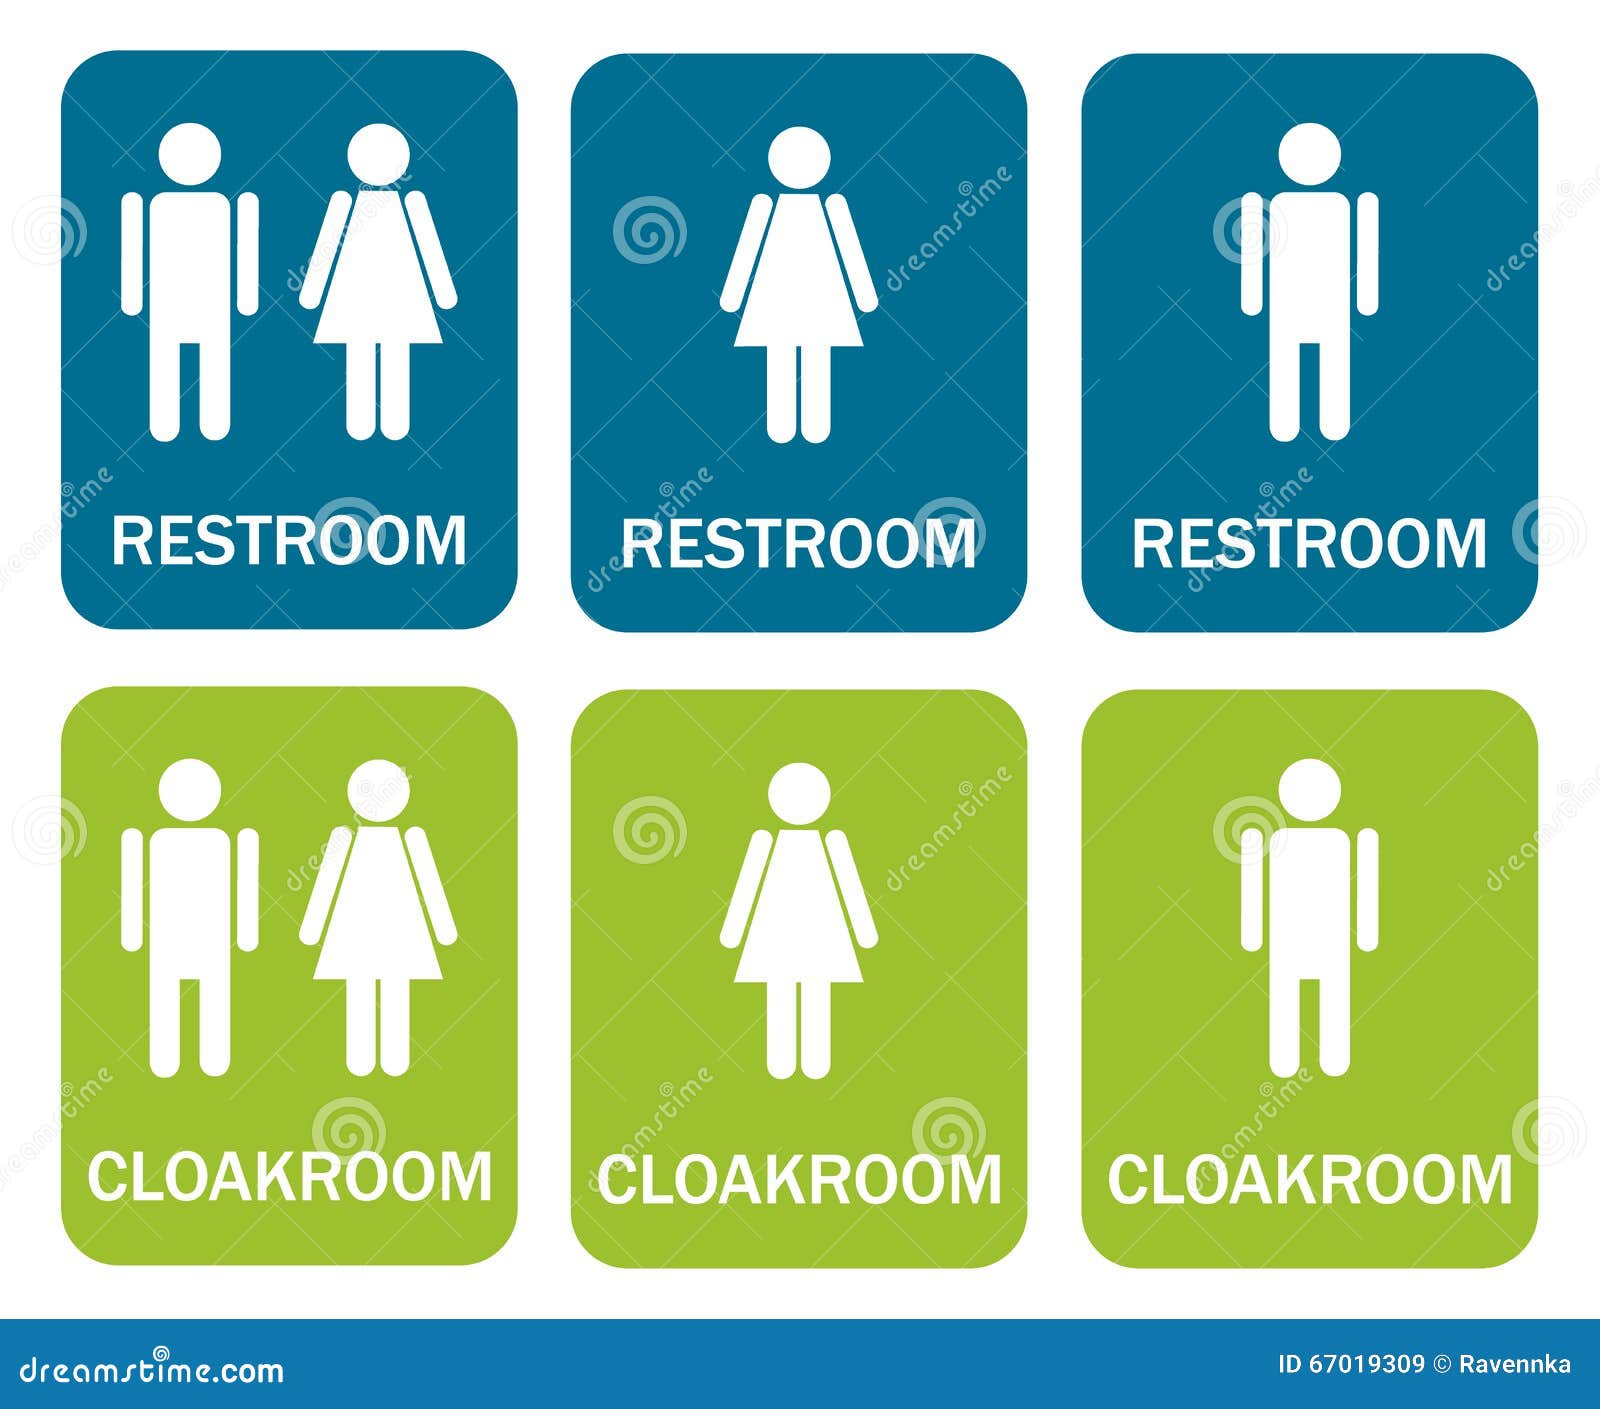 6  signs - 3 for restroom and 3 for cloakroom